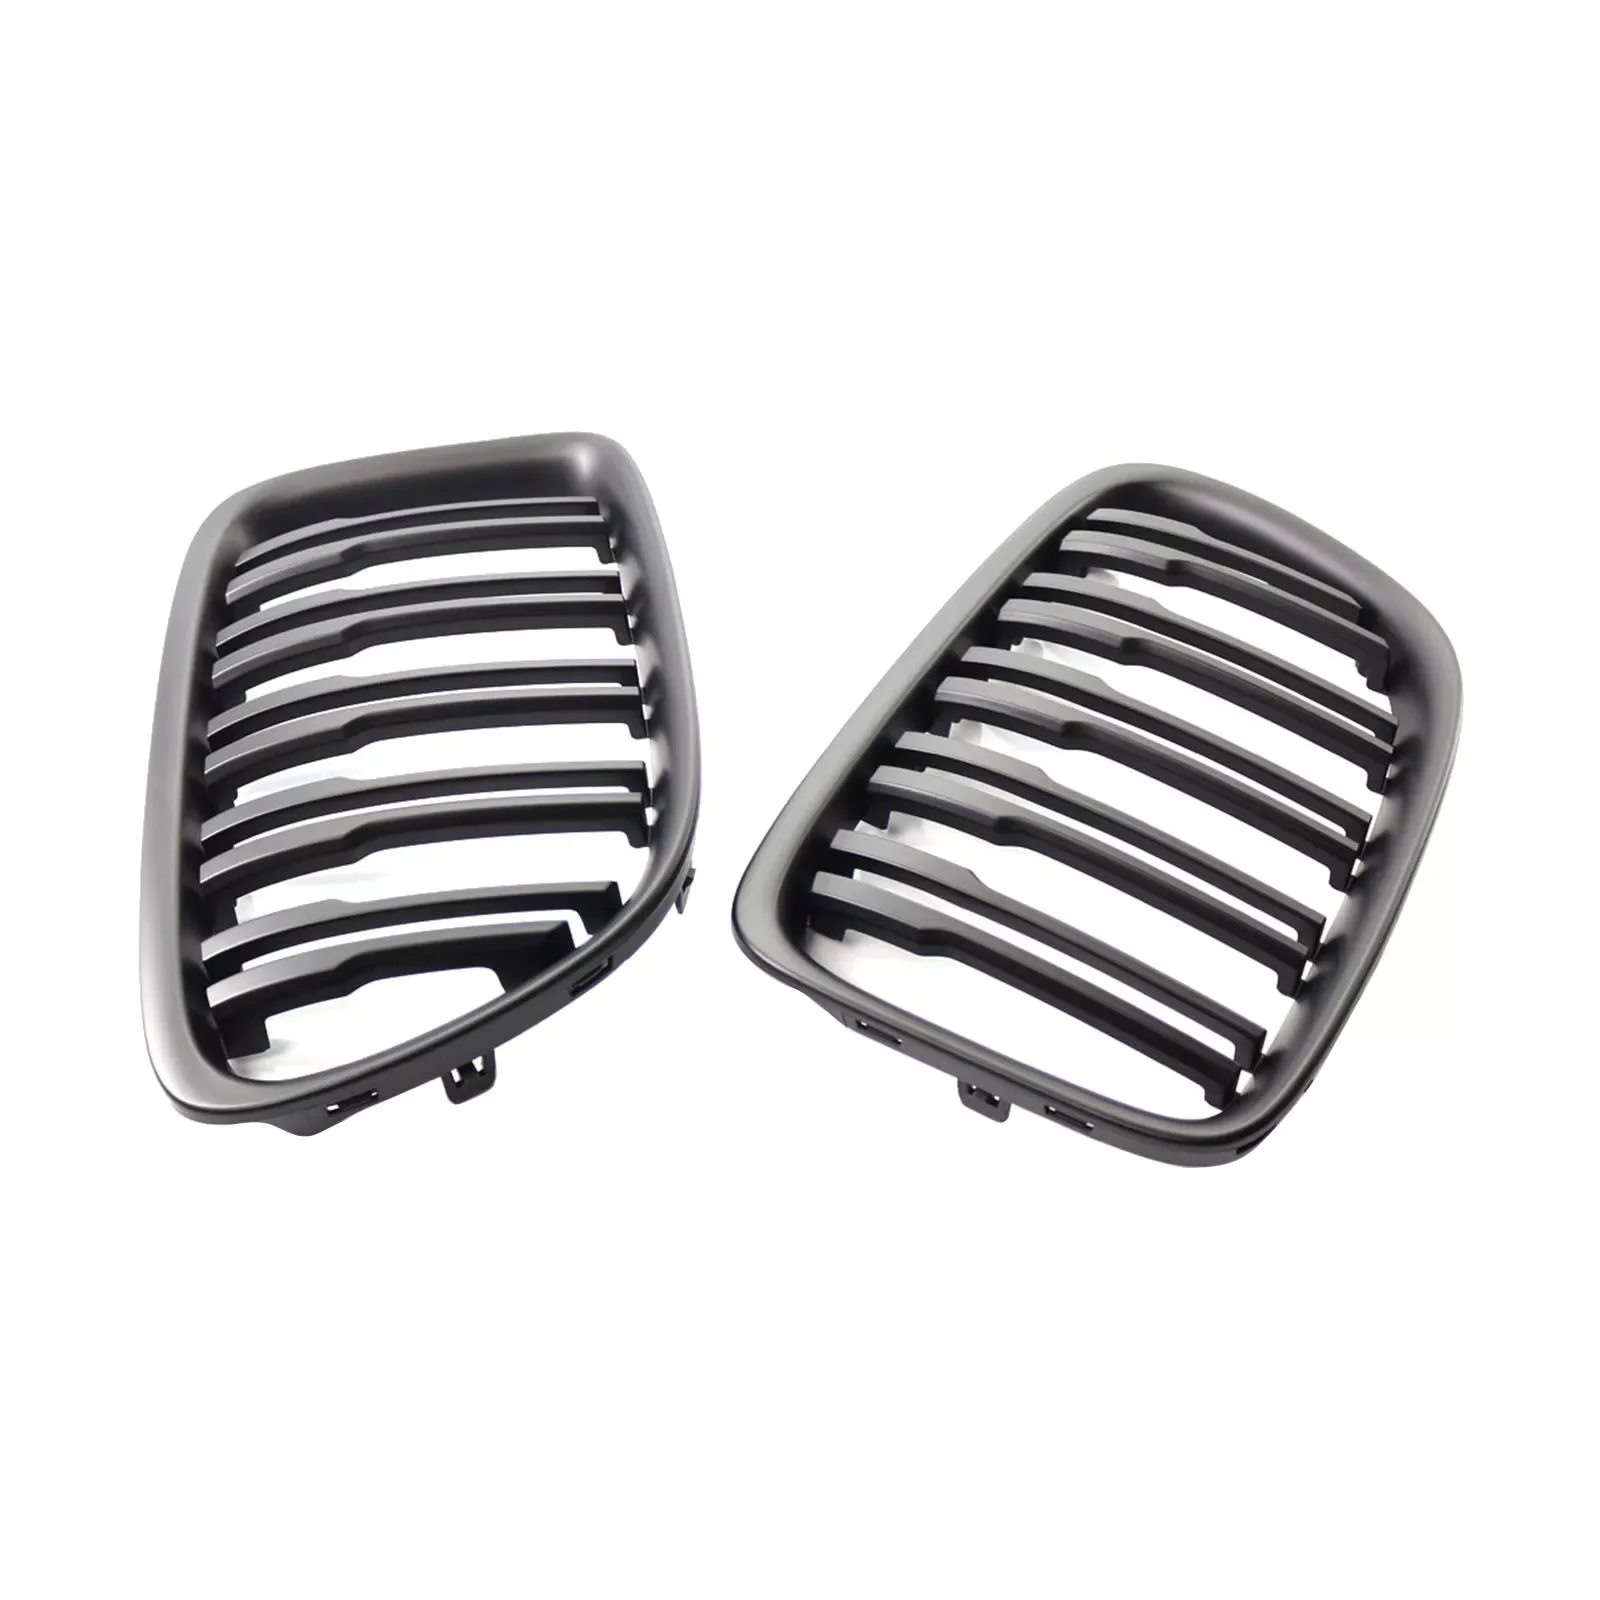 

2x Grille Front Compatible for BMW E84 X1 20i 25i 28i 2009 2011 2010 2013 2014 Double Slat Bumper Racing Grill Matte Black